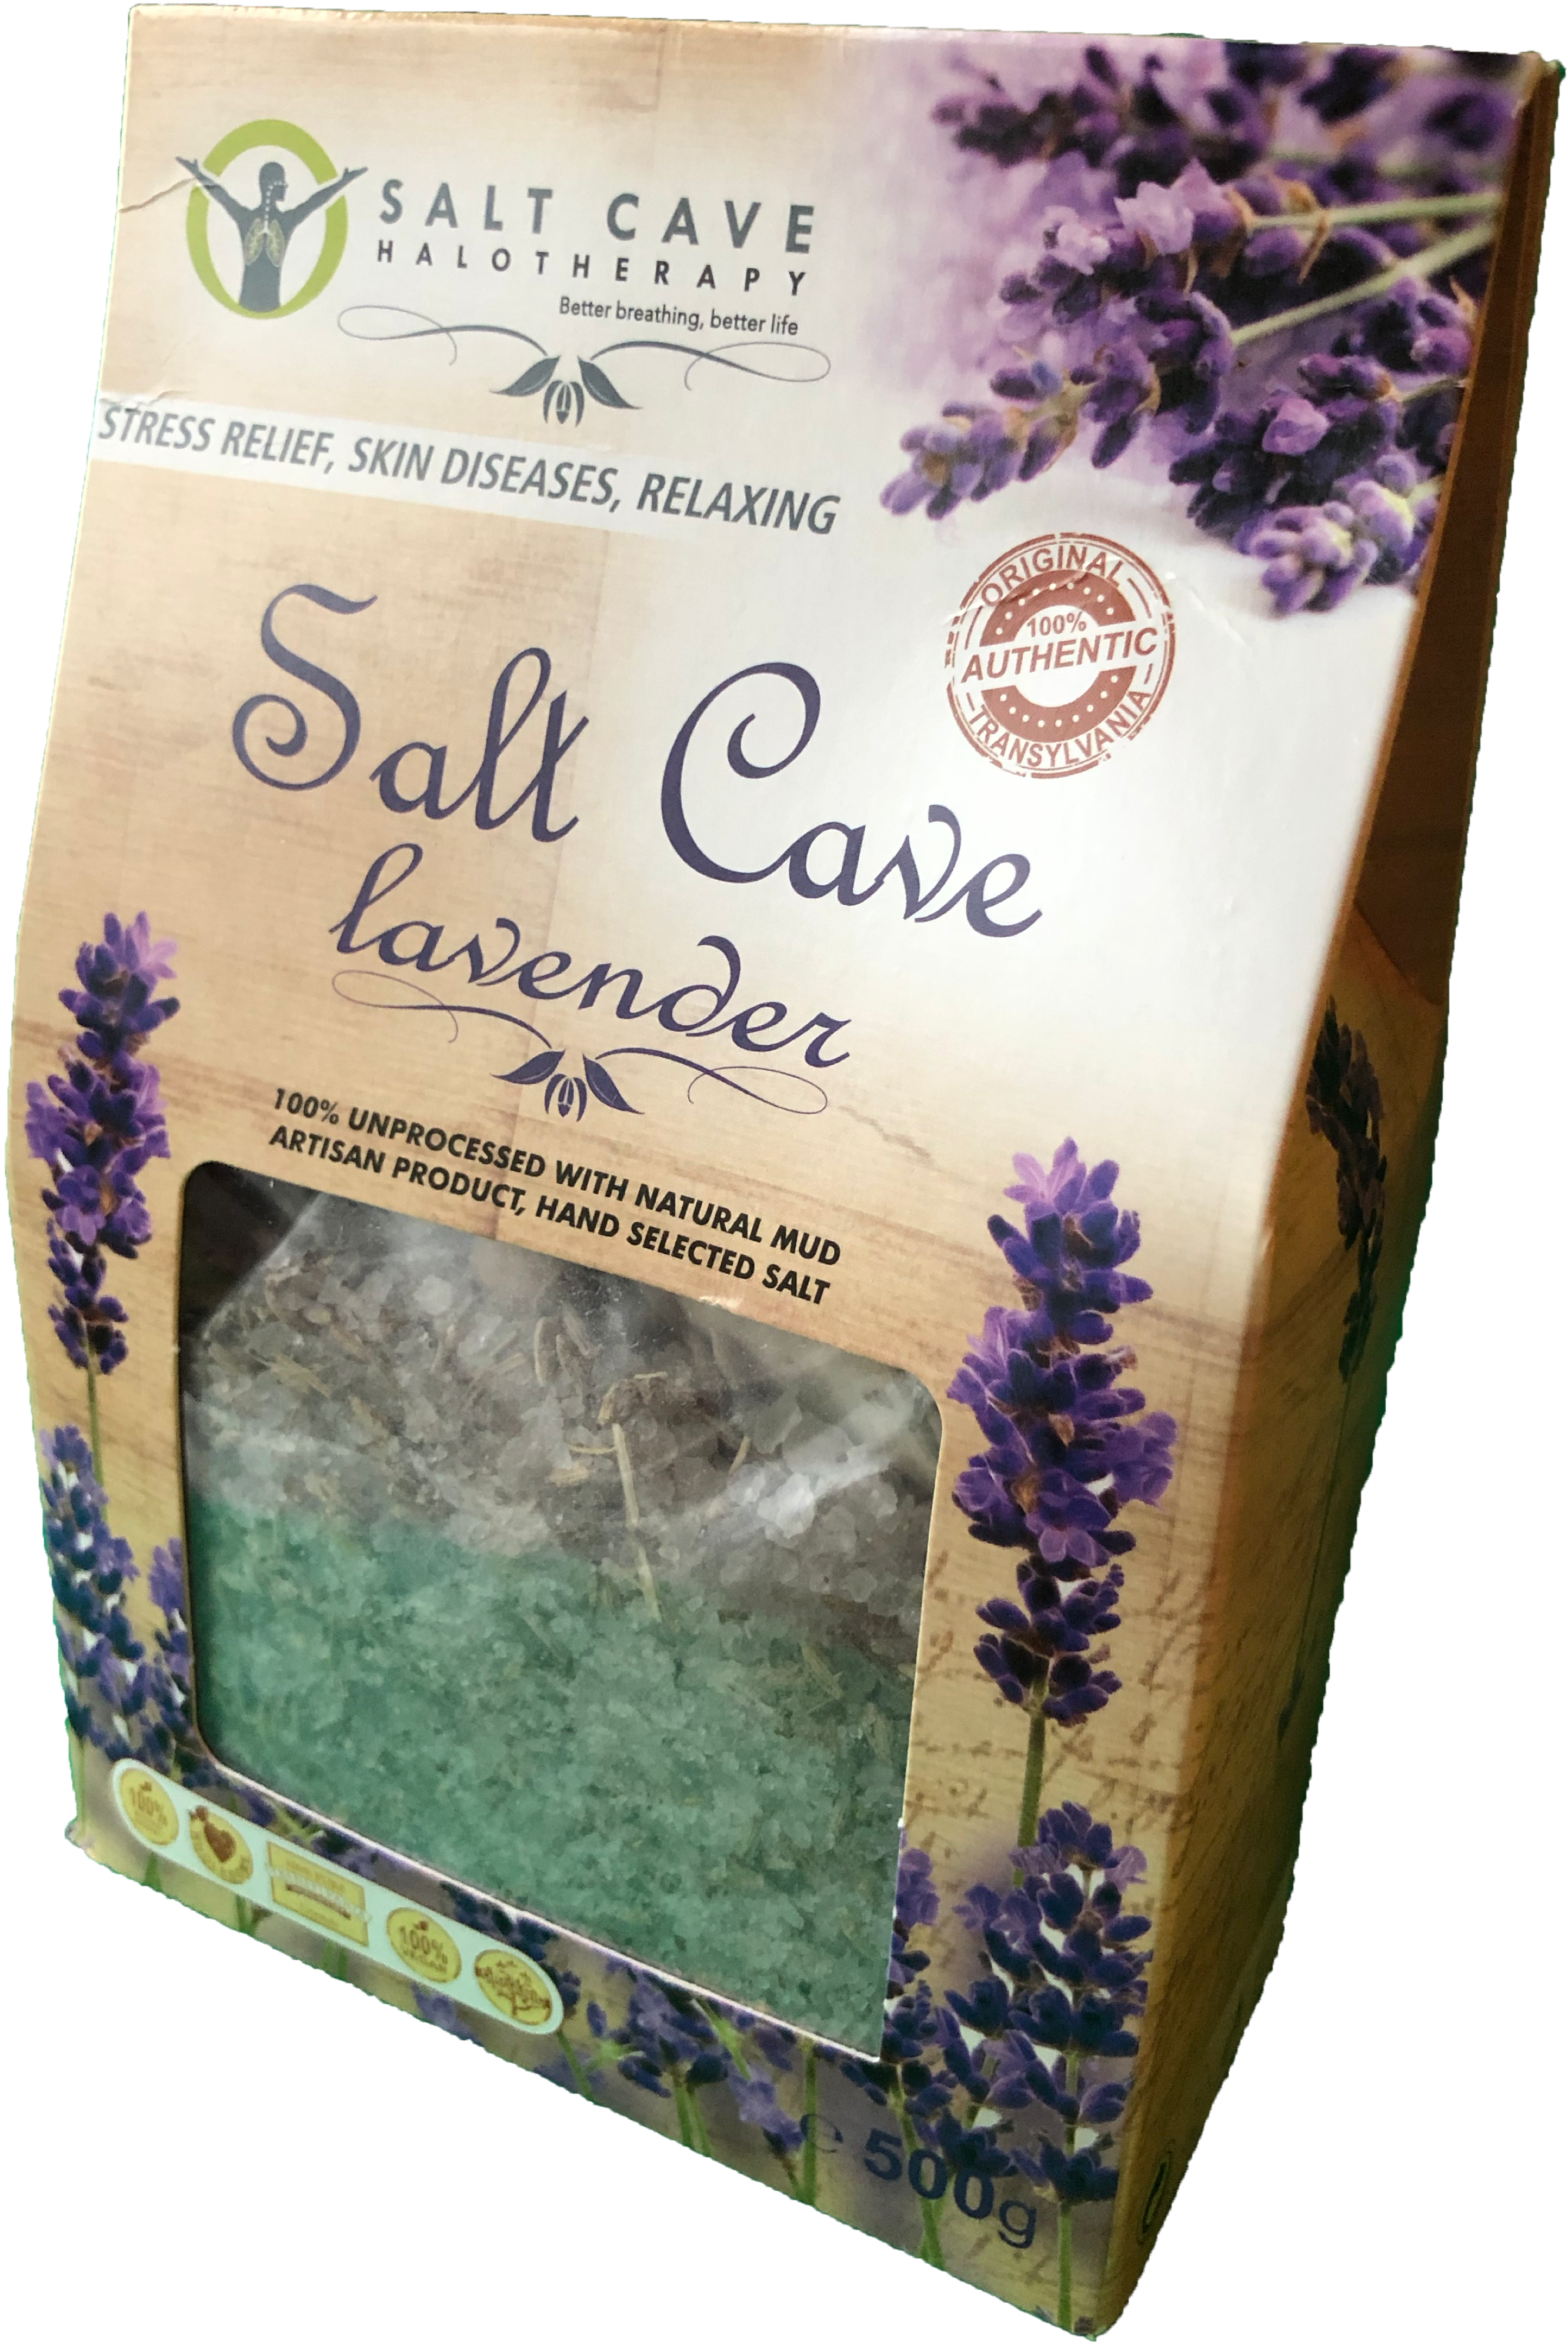 Lavender Scented Salt Cave Therapy Product